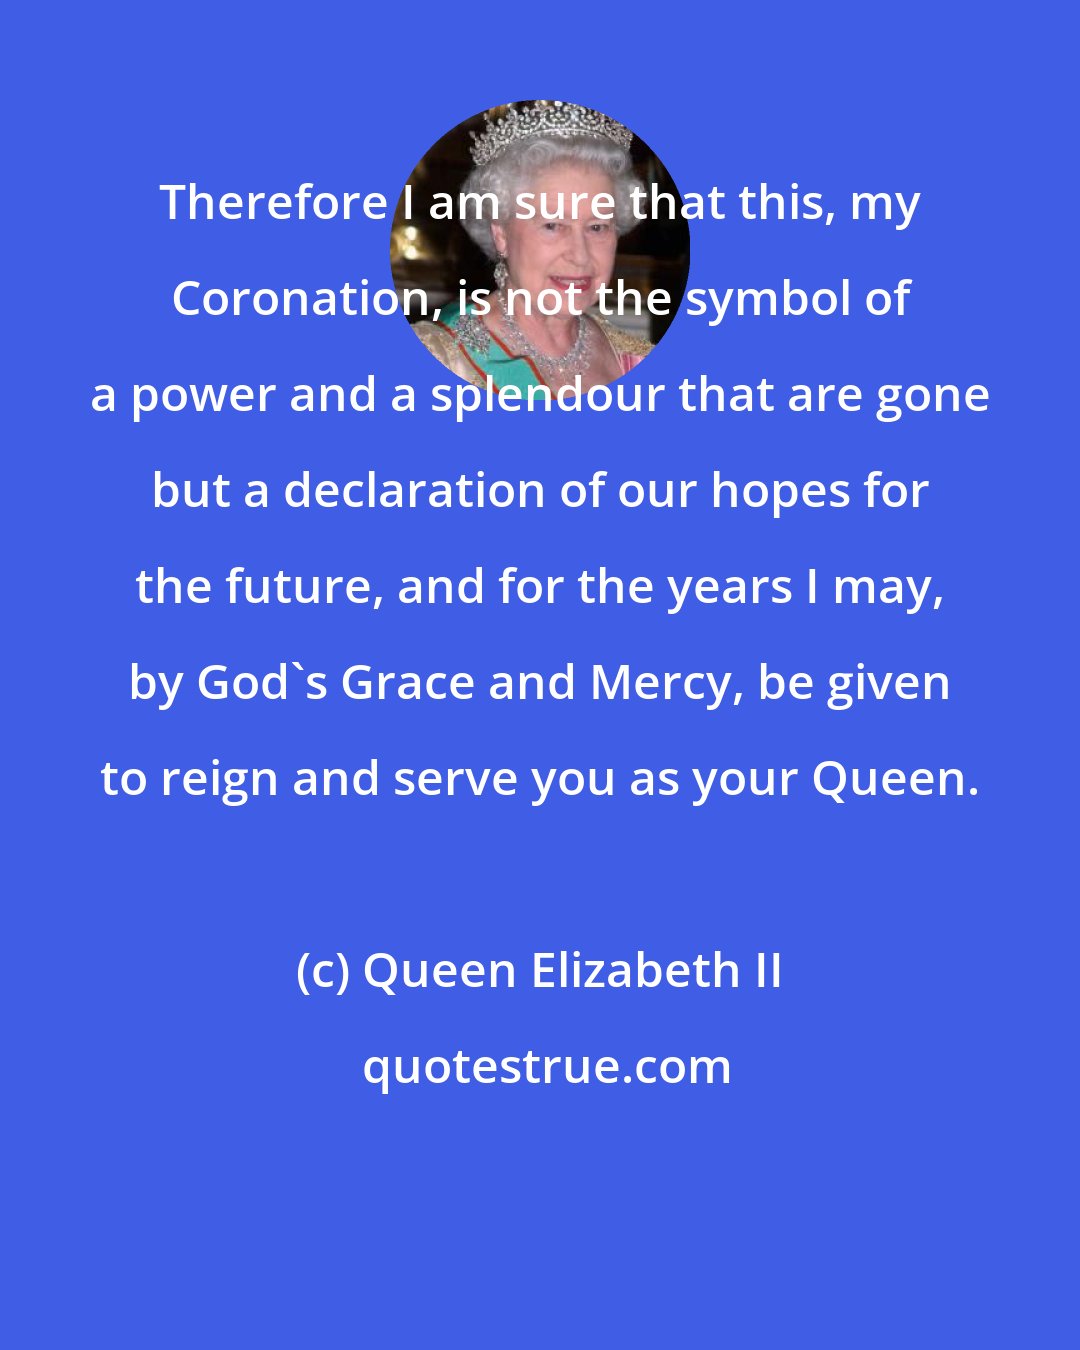 Queen Elizabeth II: Therefore I am sure that this, my Coronation, is not the symbol of a power and a splendour that are gone but a declaration of our hopes for the future, and for the years I may, by God's Grace and Mercy, be given to reign and serve you as your Queen.